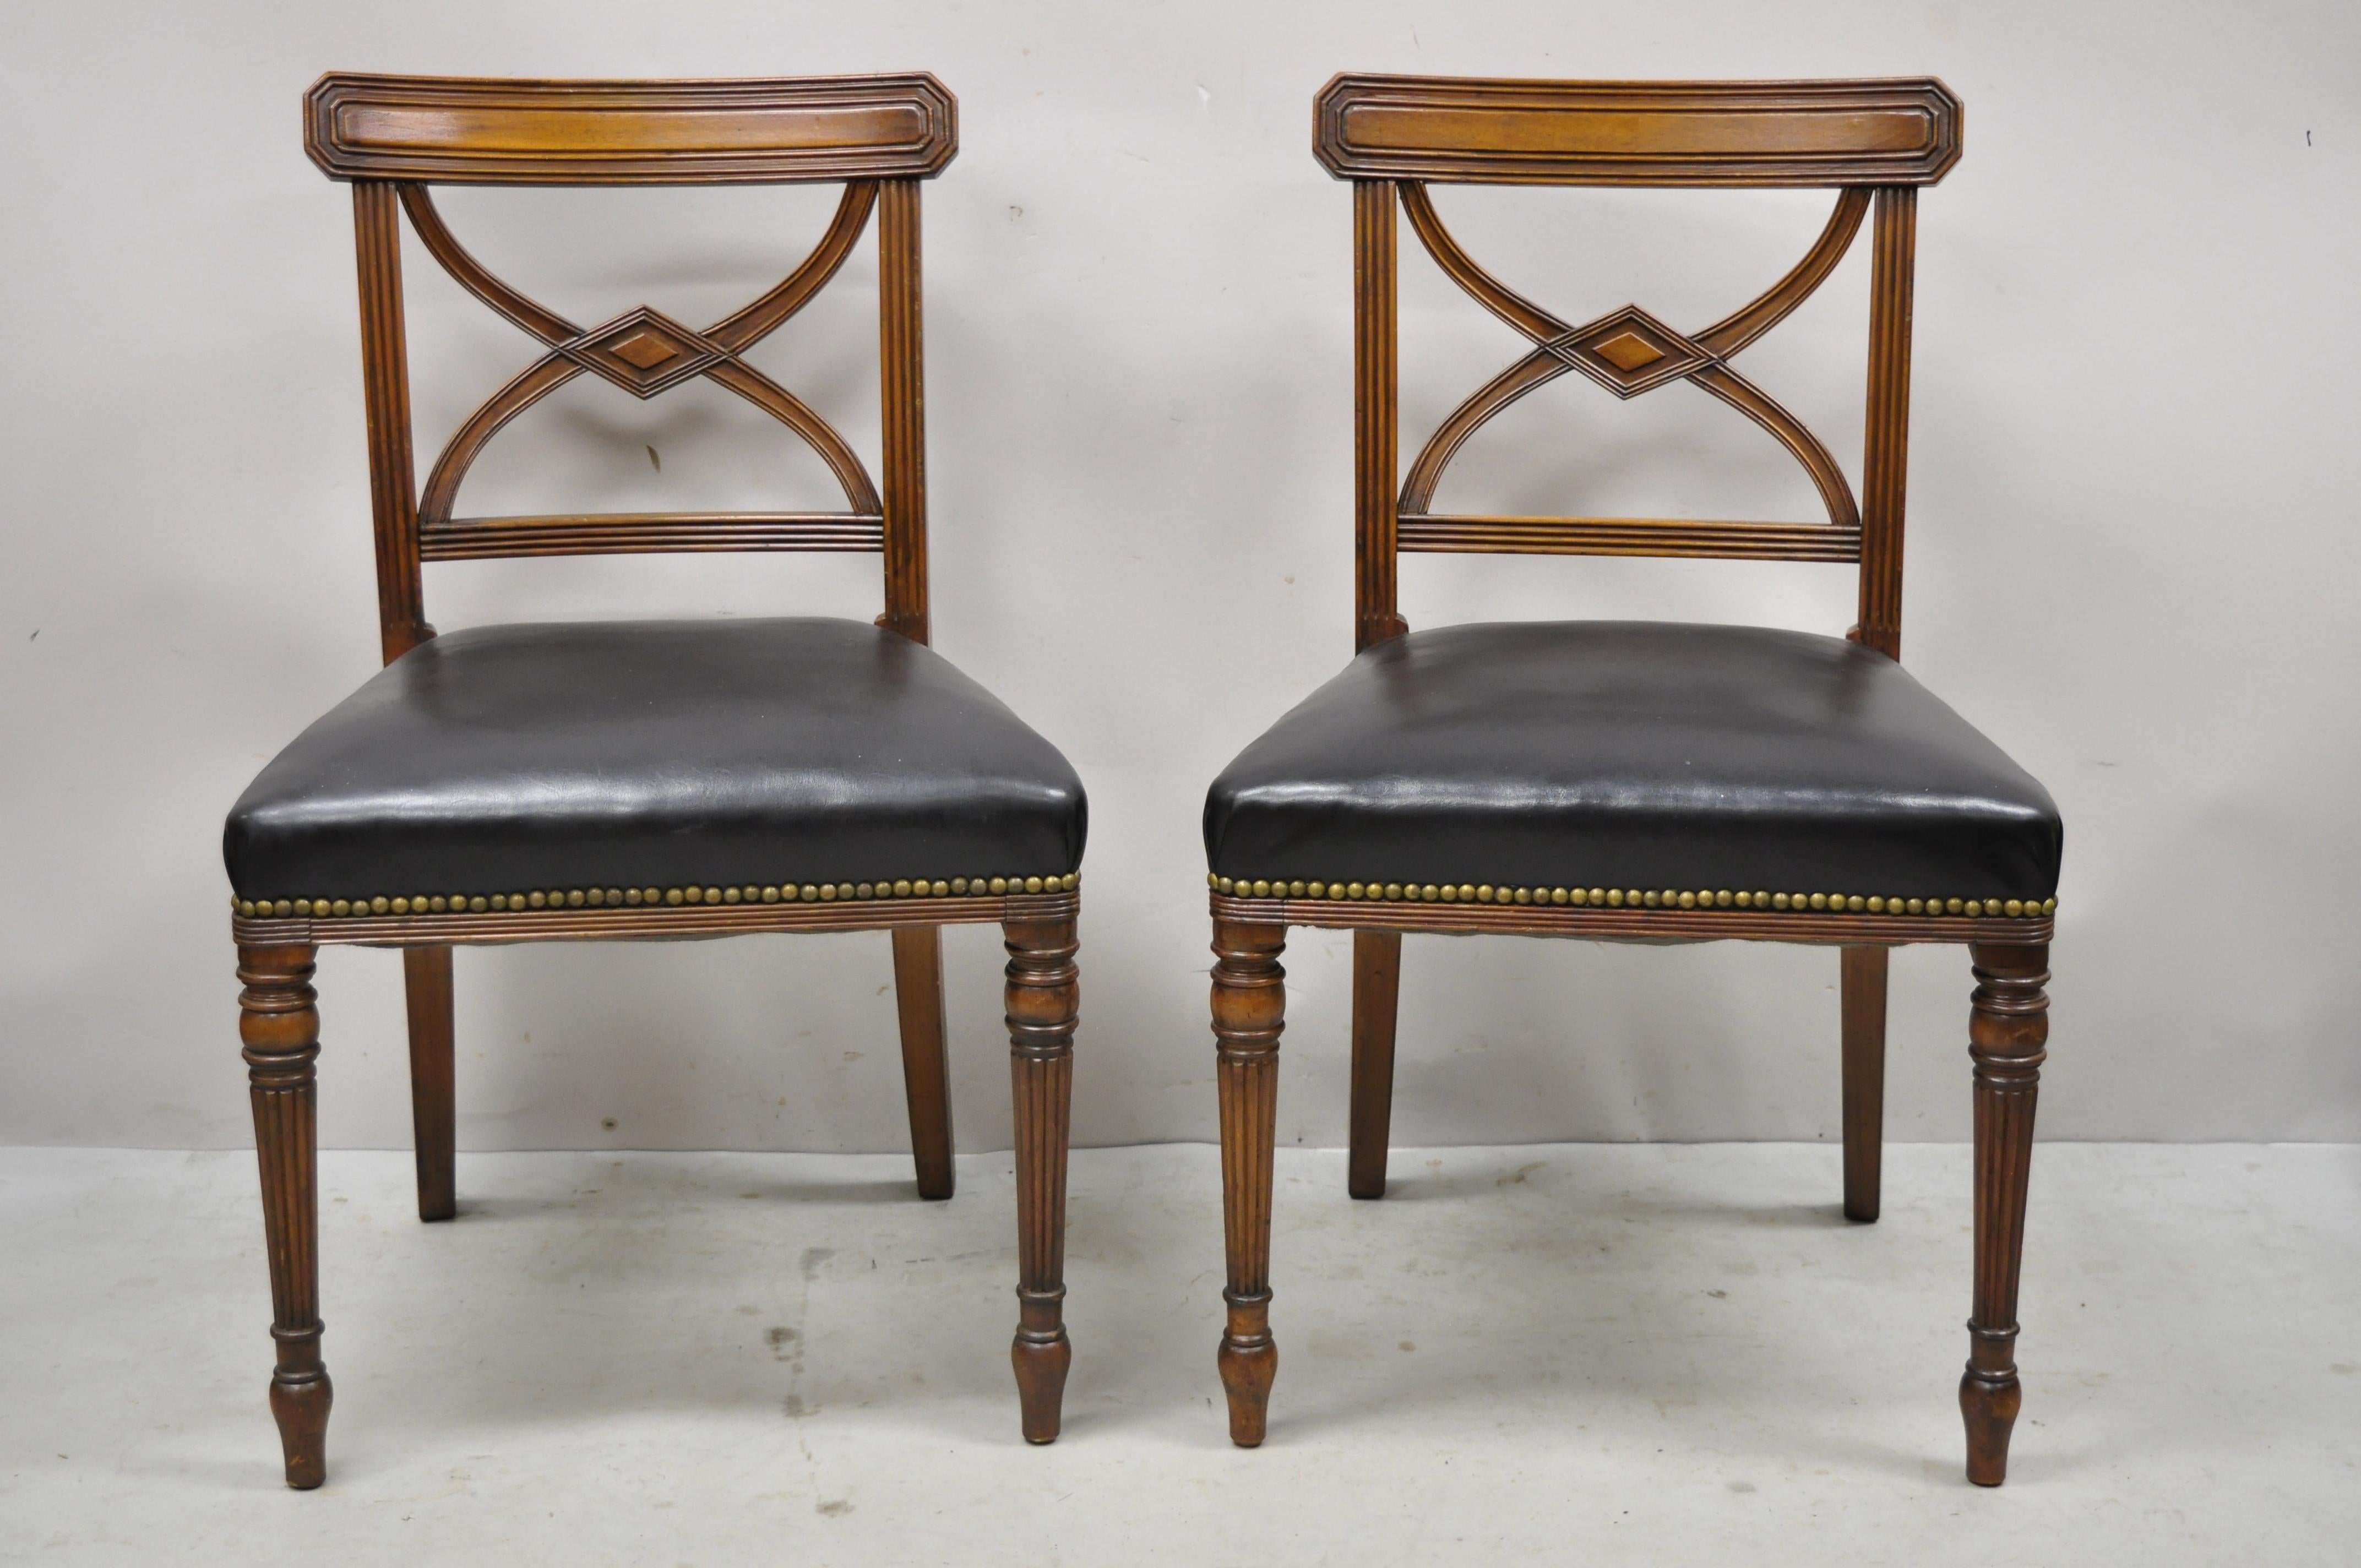 Antique custom English regency solid mahogany black leather side chair - a pair. Item features solid wood construction, black leather upholstery, nicely carved details, tapered legs, very nice vintage pair, quality English craftsmanship, great style